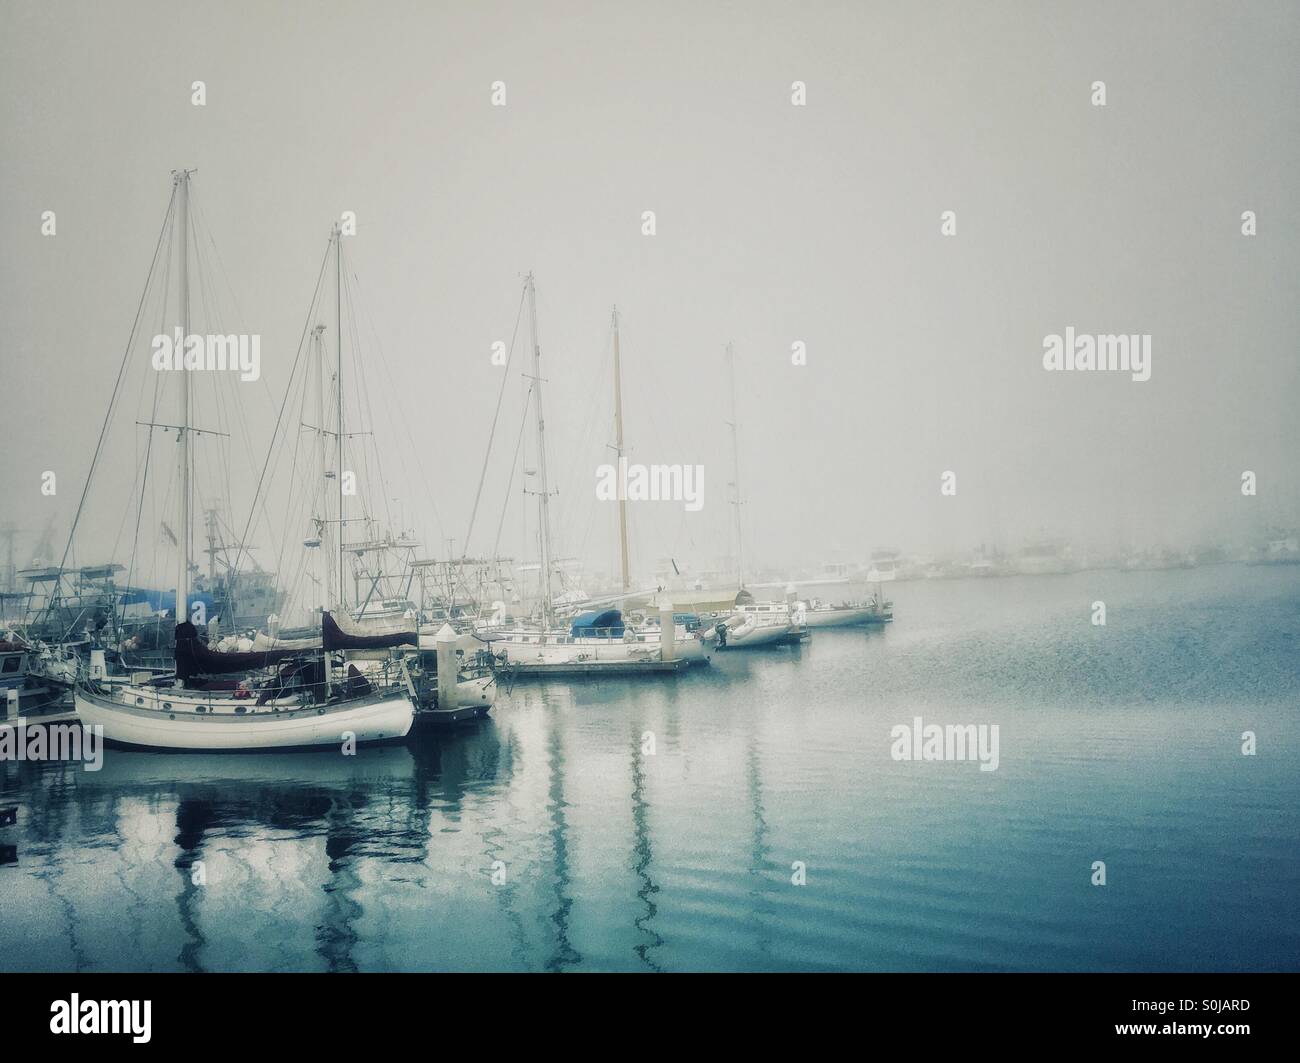 Boats Docked At The Harbor In The Misty Fog. Generic/Any Names And Numbers Taken Out. Stock Photo